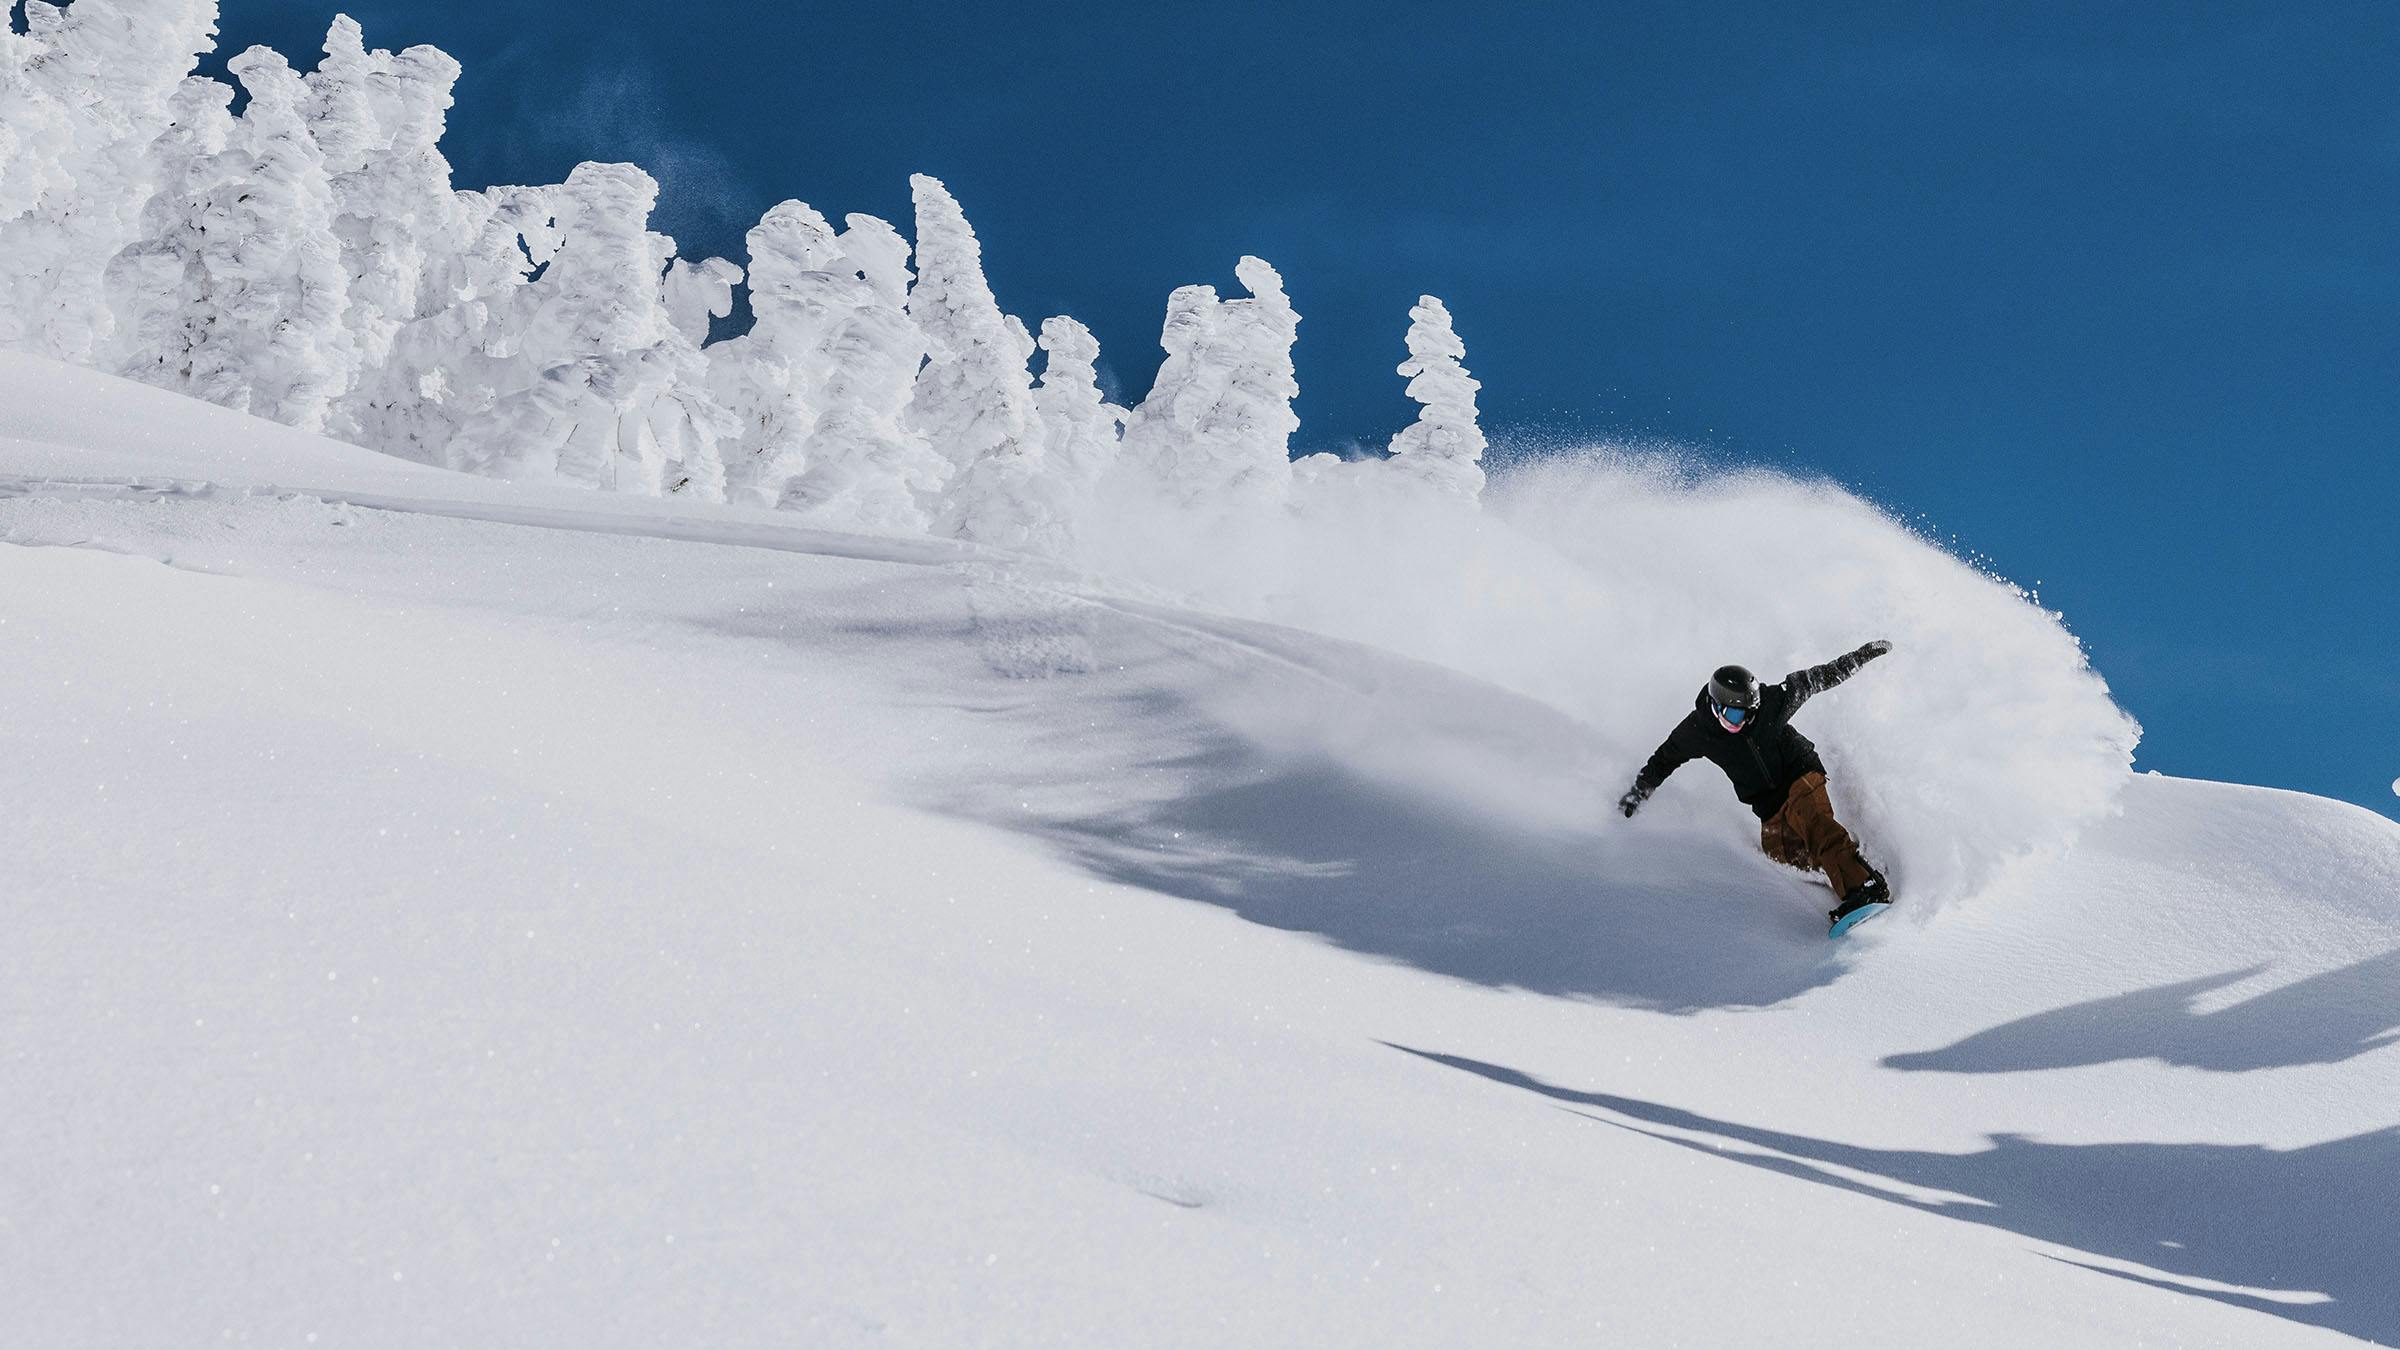 Snowboarder action powder shot with snow-covered trees and blue skies